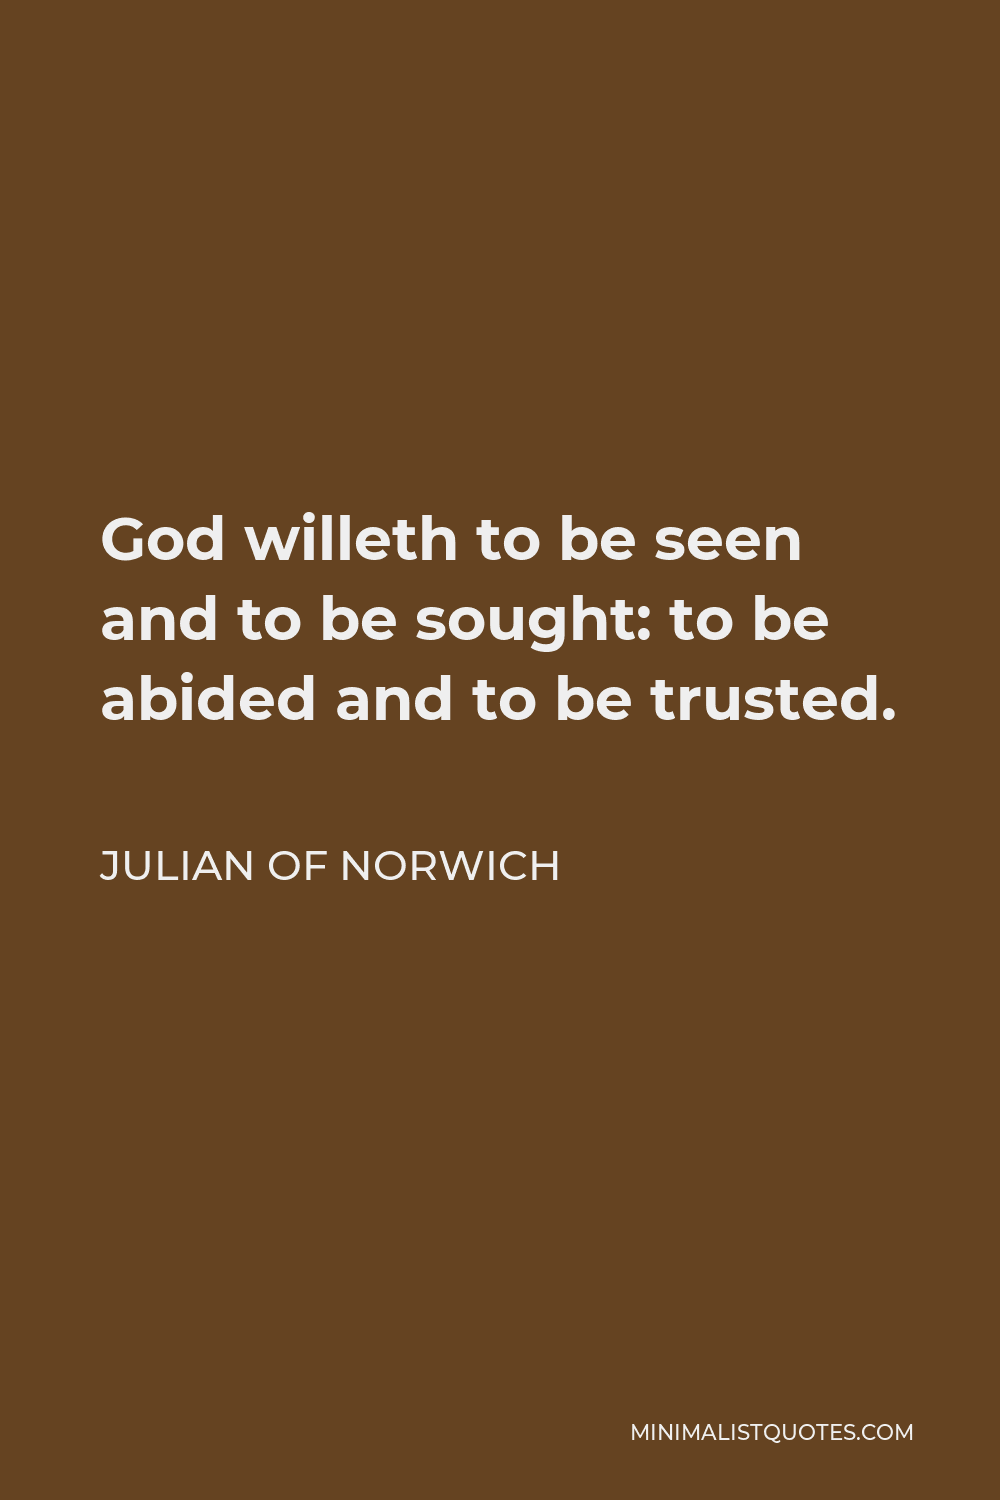 Julian of Norwich Quote - God willeth to be seen and to be sought: to be abided and to be trusted.